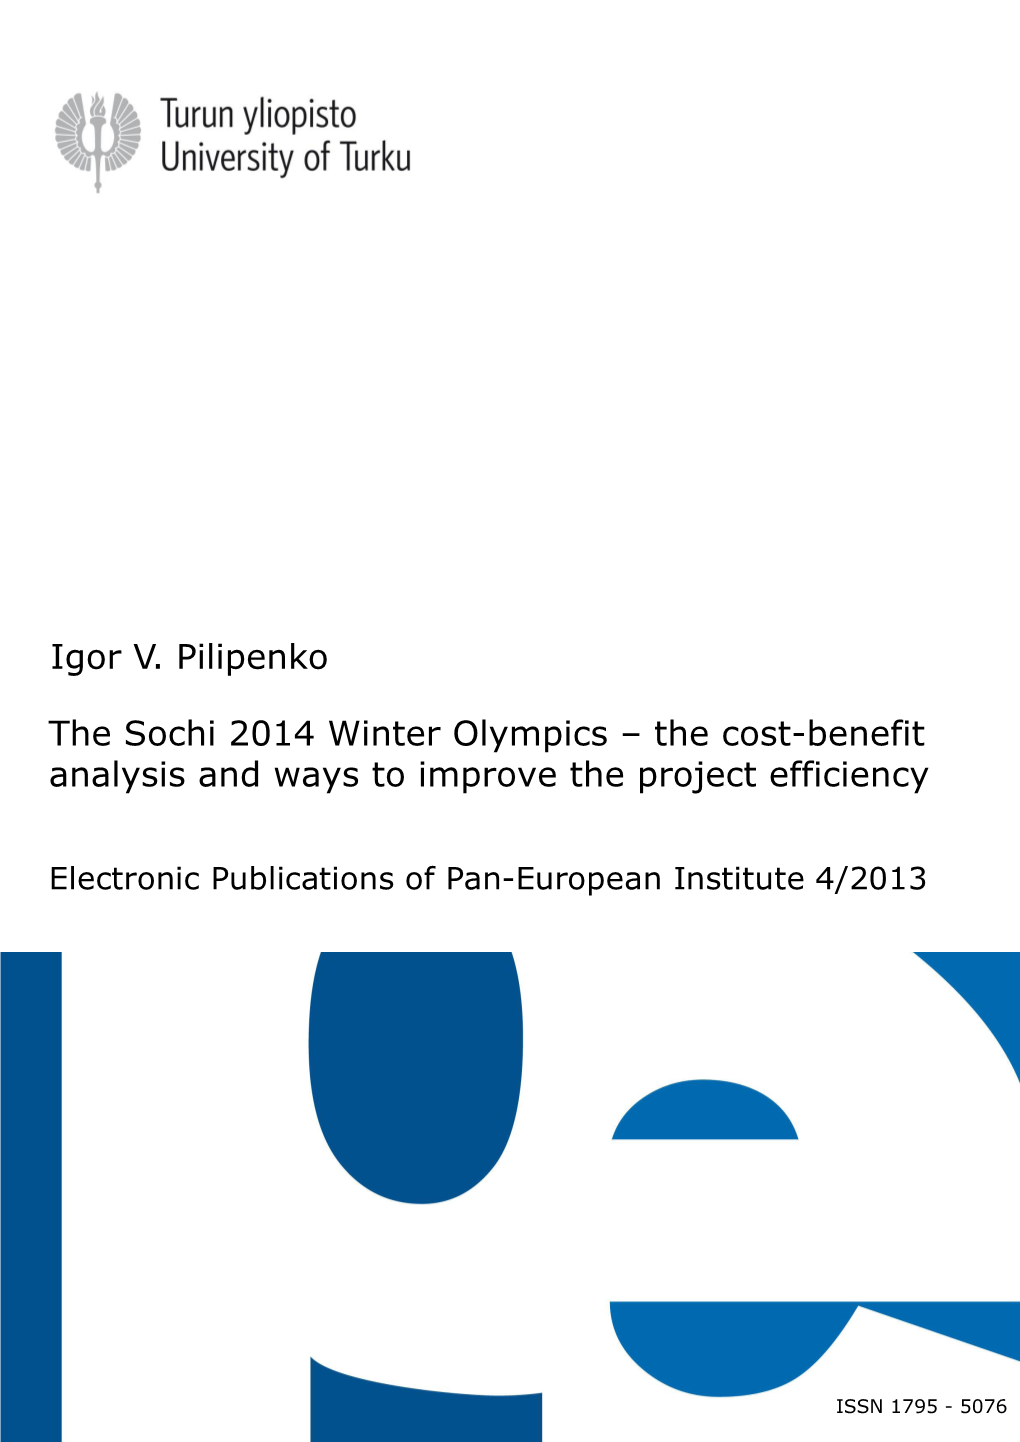 The Sochi 2014 Winter Olympics – the Cost-Benefit Analysis and Ways to Improve the Project Efficiency